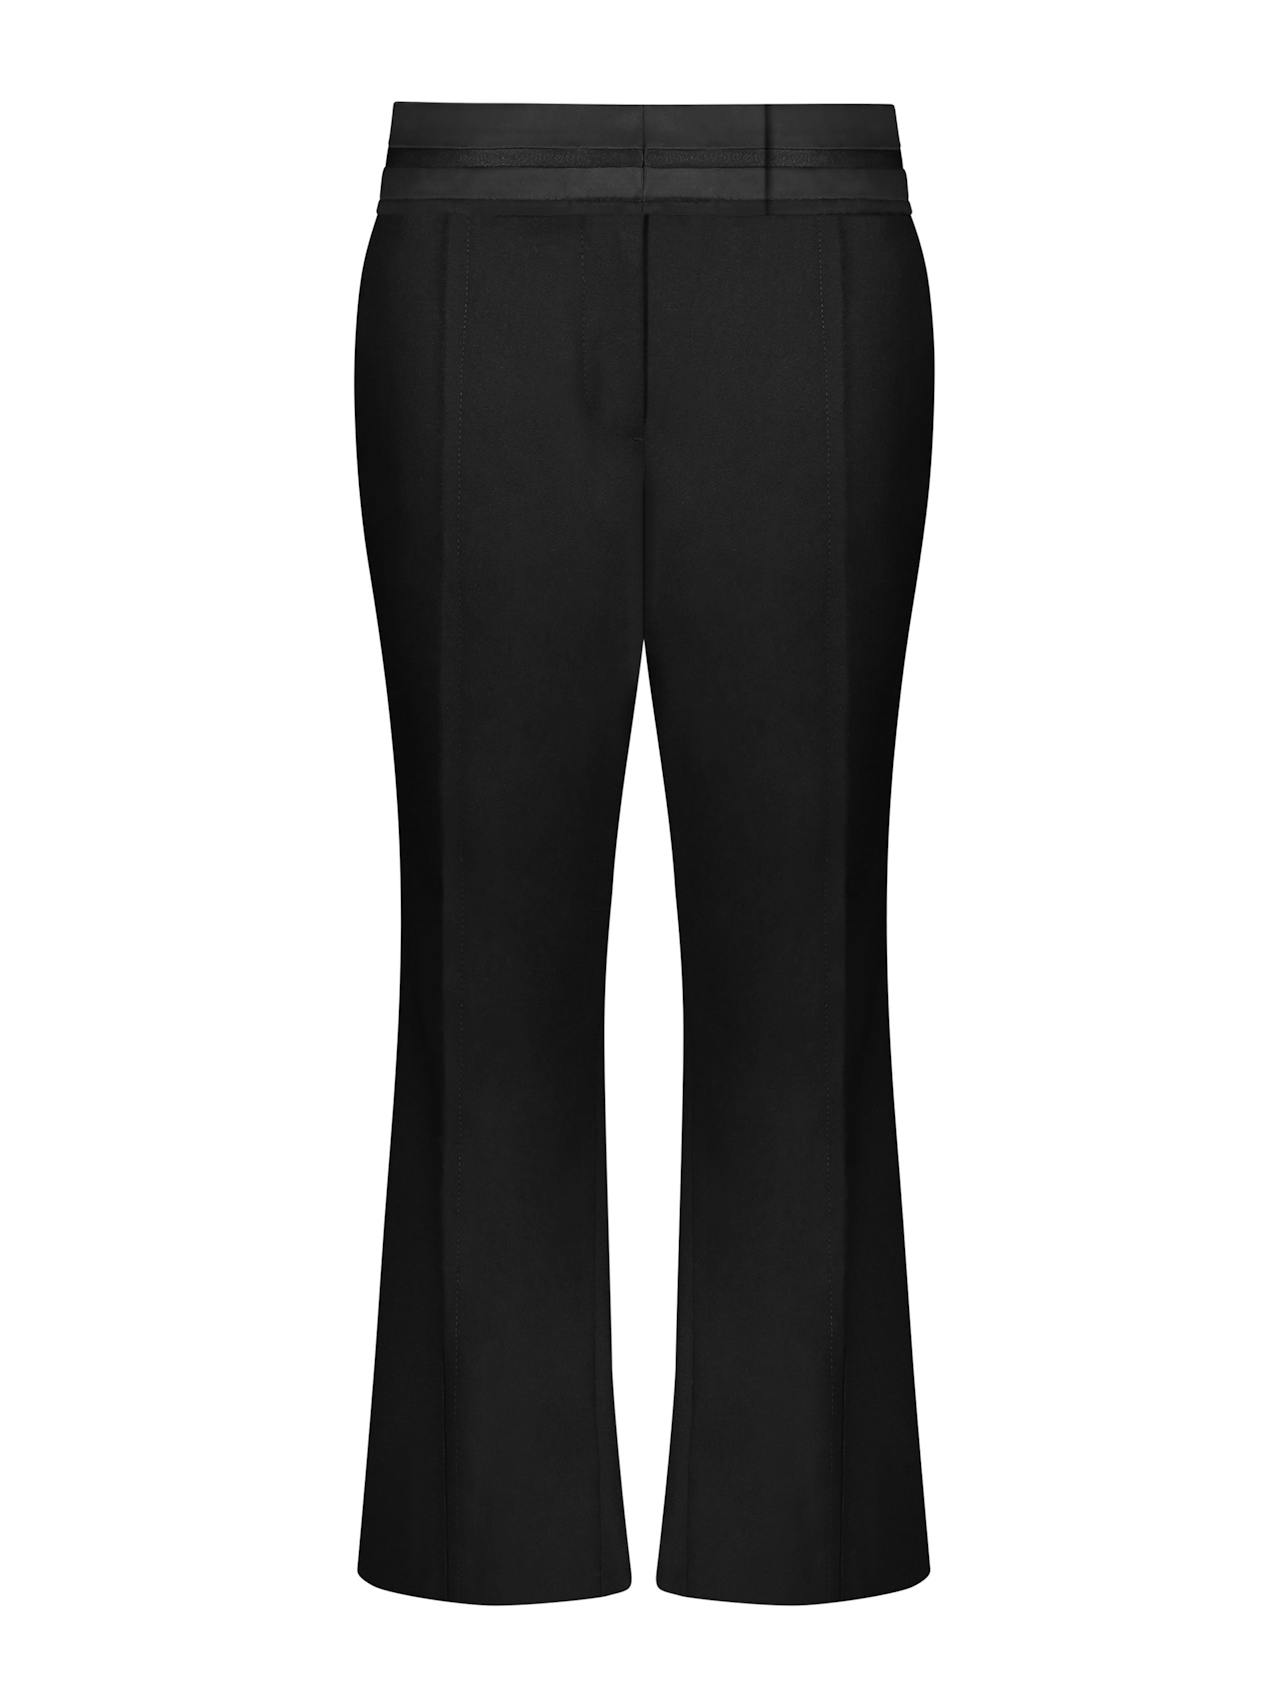 Black cropped flare trouser with slit